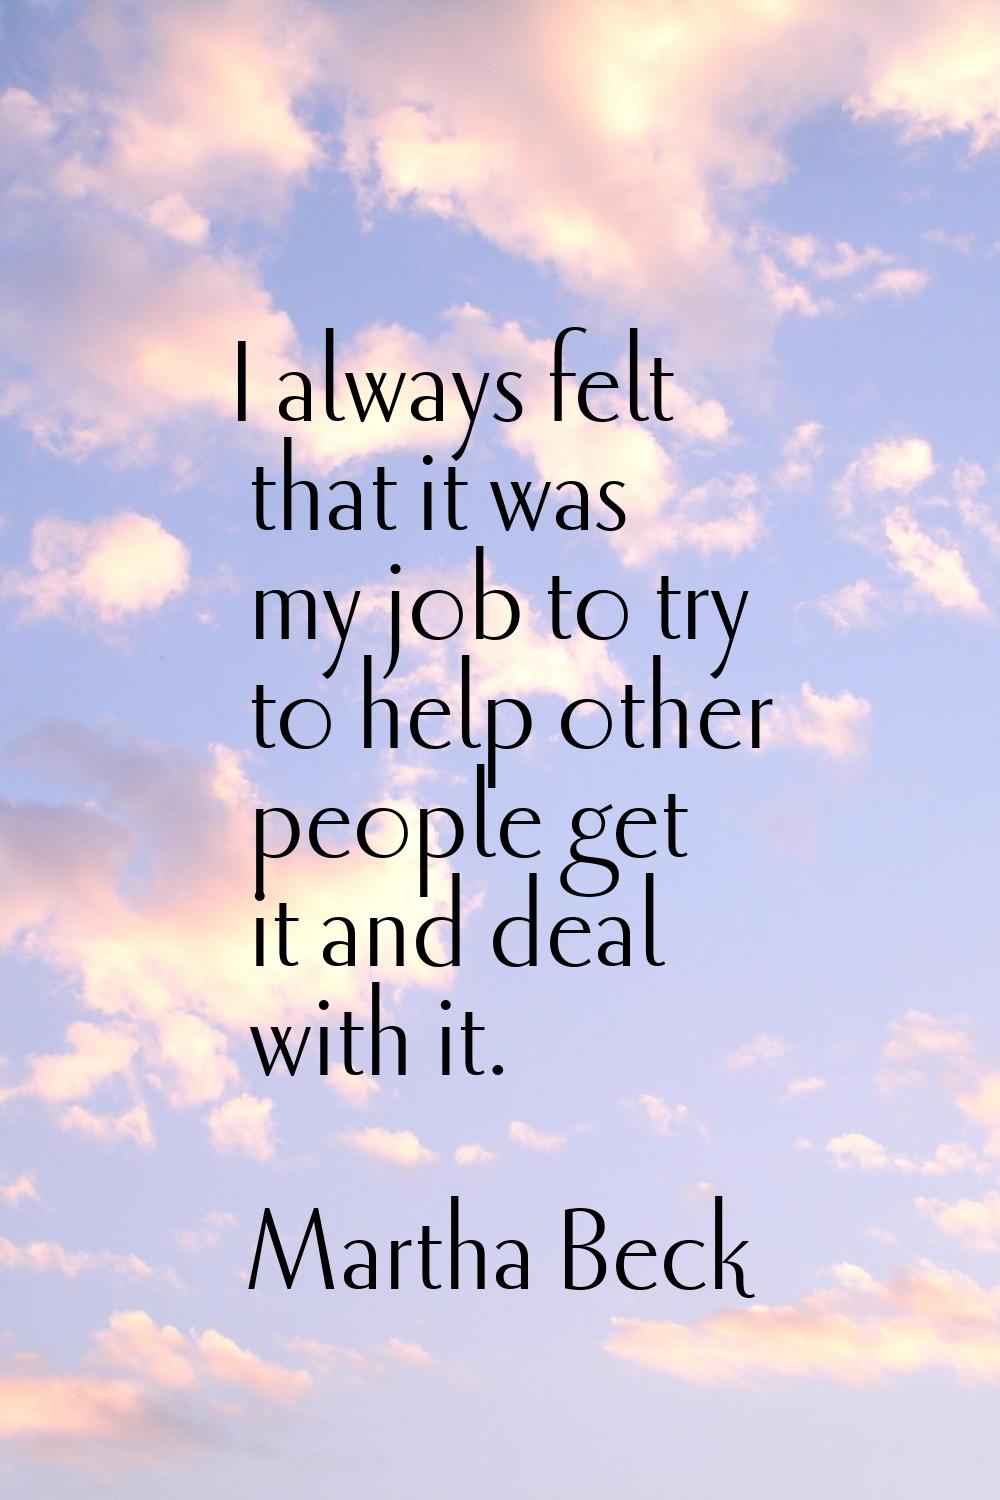 I always felt that it was my job to try to help other people get it and deal with it.